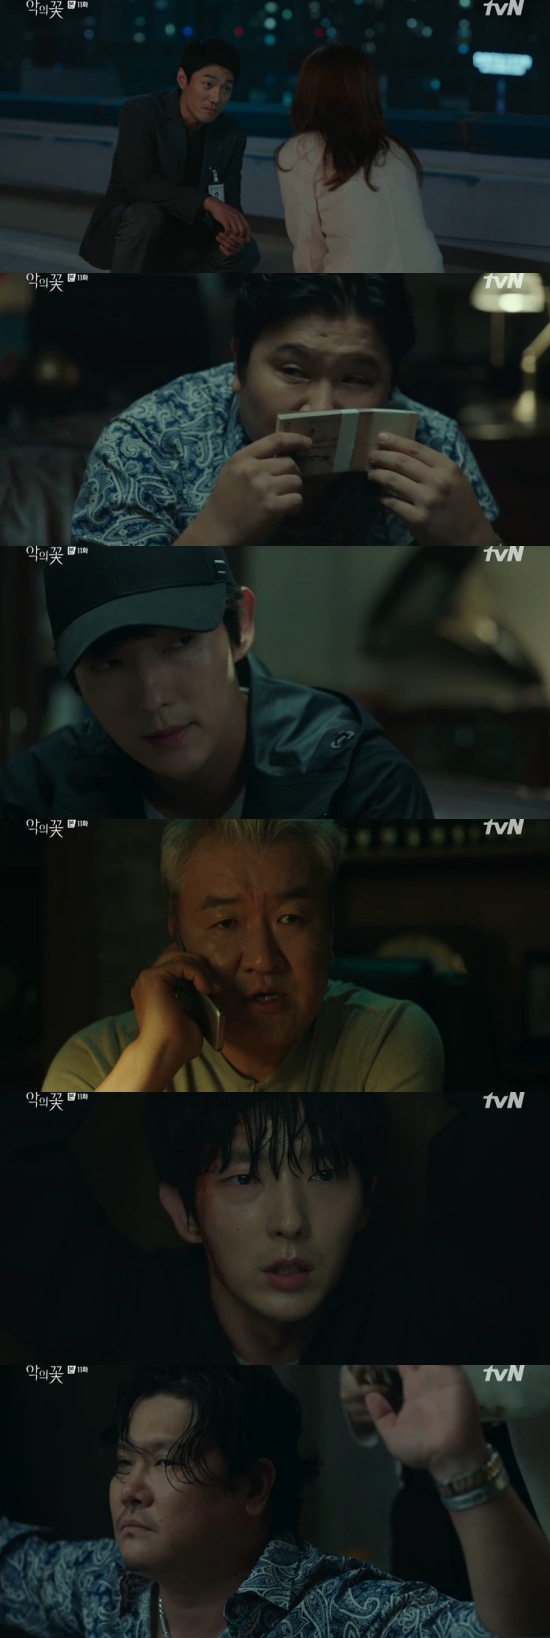 Flower of Evil Lee Joon-gi is Arrested by PoliceIn the 11th episode of TVNs Drama Flower of Evil, which was broadcast on the 2nd, Do Hyun-soo (Lee Joon-gi) was portrayed as being Arrested by Choi Jae-Sup (Choi Jun-young) to stay with Cha JiWon (Moon Chae-won).On this day, Choi Jae-Sup knew that Do Hyun-soo had borrowed Baek Hee-sungs identity and hid his identity.Choi Jae-Sup noticed that Cha JiWon also knew the identity of Do Hyun-soo, and said, What happened to the real Baek Hee-sung. Do you know that?I think someone who has been deprived of his identity for a decade is still safe.Cha JiWon said, Baek Hee-sungs parents helped me. The parents gave me their sons identity.He is not a person to hurt others, he said, and Choi Jae-Sup said, Do you have any evidence?Cha JiWon knelt down to Choi Jae-Sup to defend Do Hyun-soo, and said, You just look at him once, you know how the world will look at him.Everyones gonna watch and throw rocks for fun. You know. No interest in the uninterested truth. How do you see that?But Choi Jae-Sup said: Tonight, I will wipe out Yeom Sang-cheol and Arrest Do Hyun-soo tomorrow morning, I cant leave you the same.So youre out of it, he declared.In addition, Do Hyun-soo met with Yeom Sang-cheol (Kim Ki-moo) to arrest the human trafficking organization. Do Hyun-soo pretended to trade with Yeom Sang-cheol and handed over the money, and at that time, Baek Man-woo (Son Jong-hak) called Yeom Sang-cheol.Im talking to the police, Do Hyun-soo, and Ill get twice as much money from Do Hyun-soo. Furthermore, he said, Hes a person who hides his identity.I can not contact the police directly even if I have a problem with the police. I would not have come with the police. Yeom Sang-cheol tried to kill Do Hyun-soo by disguised as a fire accident, and fortunately Cha JiWon appeared first.Cha JiWon pointed the gun at Yeom Sang-cheol, and Yeom Sang-cheol attacked Cha JiWon in a careless gap.Do Hyun-soo was angry when Cha JiWon started to be assaulted, and he showed off his strength and untied the straps in his hands and rushed to Yeom Sang-cheol.Yeom Sang-chul was unconscious, and Cha JiWon dissuaded Do Hyun-soo, who said, This is not the time to do this. Police will come here. You cant go home.Choi has evidence that hes Do Hyun-soo. Hes Arrested tomorrow. You got a situation? Go. Go. Go where I cant find him.Is it your specialty to run and hide? Youre gonna live in prison for your sister? Go. Go. Do Hyun-soo escaped as if he was running away, but he stopped the car and called Cha JiWon several times.Eventually Cha JiWon headed to Do Hyun-soo, and the two reunited on the road.Cha JiWon said, You cant live in Baekhee Castle anymore. Youre caught. Run. You said Id run. You wanted me more.I have to do something more, he said. Why do not you know why you do not abandon me? I do not understand. Cha JiWon said, Do you really know? I know you are, and I do not know why I did it. Do you really do not know? And Hyun-soo said, I did wrong.I hurt you. I had to. I want to go home. Cha JiWon hugged Do Hyun-soo and said, Yes. Lets go. Lets go to my house. Lets start over there.Do Hyun-soo and Cha JiWon went home and kissed, and Do Hyun-soo talked honestly about his life from childhood.Cha JiWon mentioned the moments when he was loved when Do Hyun-soo concluded that he could not love himself. Cha JiWon said, You love me.I feel that way, he said, and Do Hyun-soo said, I love you. I love you.Cha JiWon said: Tomorrow, many people will want to define and judge who they are, dont forget any moment.Youre a stranger than I am. Support is the least explaining part of my life. Its unrealistic.Its ridiculous, he confessed.The next day, Choi Jae-Sup waited in front of Cha JiWon and Do Hyun-soos house.Cha JiWon asked Choi Jae-Sup not to handcuff him, but to take him quietly, and Do Hyun-soo was Arrested by Choi Jae-Sup.Photo = TVN broadcast screen